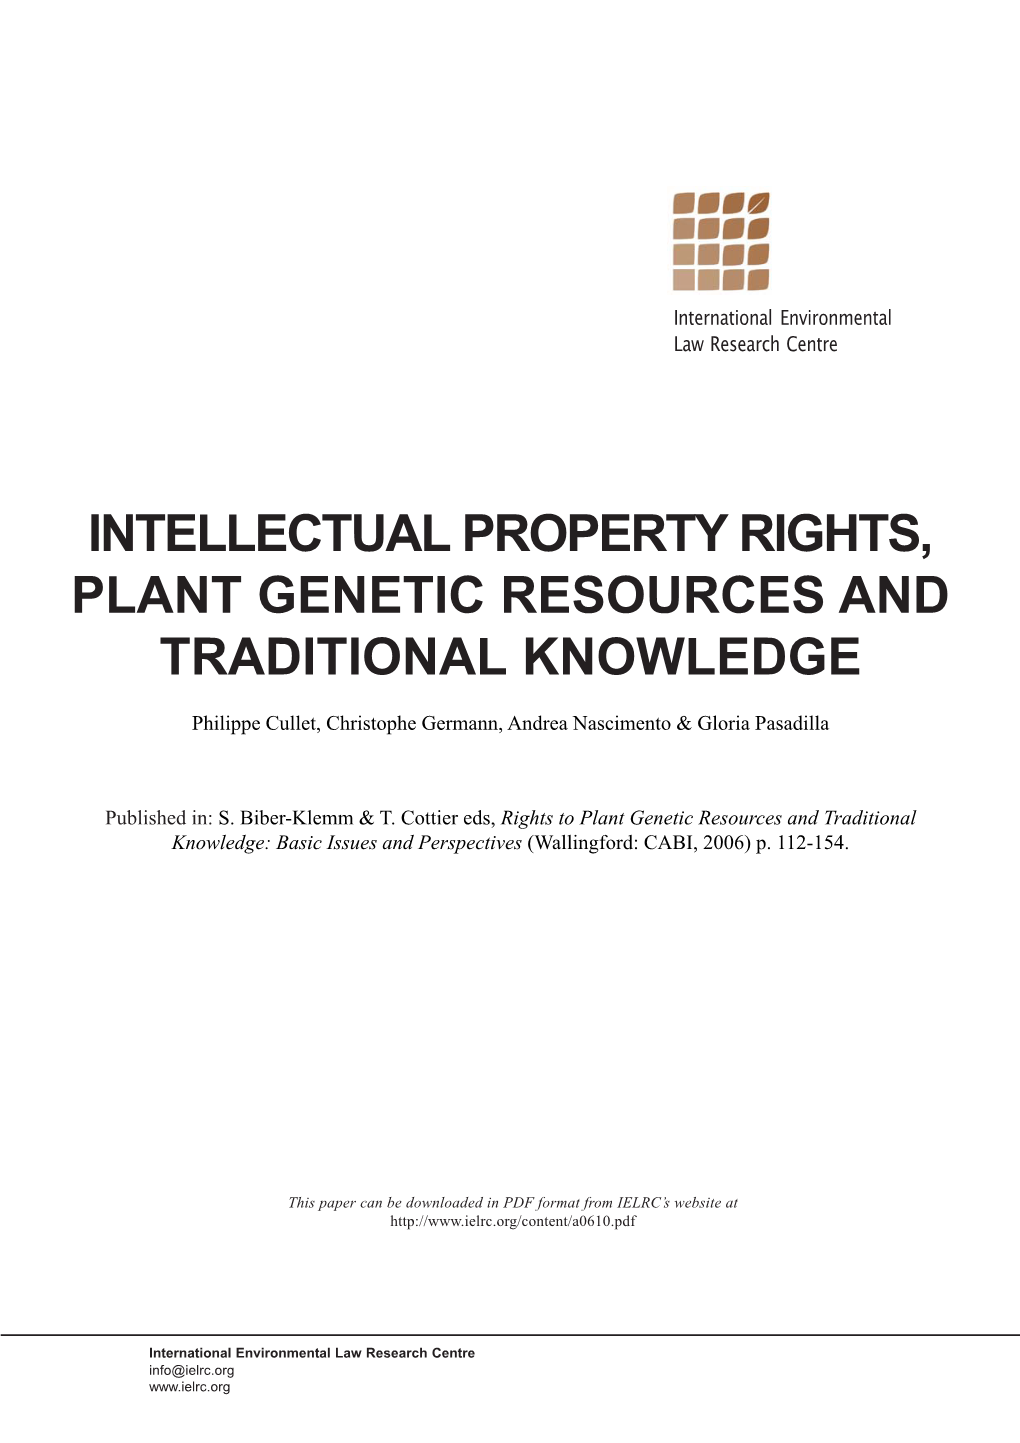 Intellectual Property Rights, Plant Genetic Resources and Traditional Knowledge